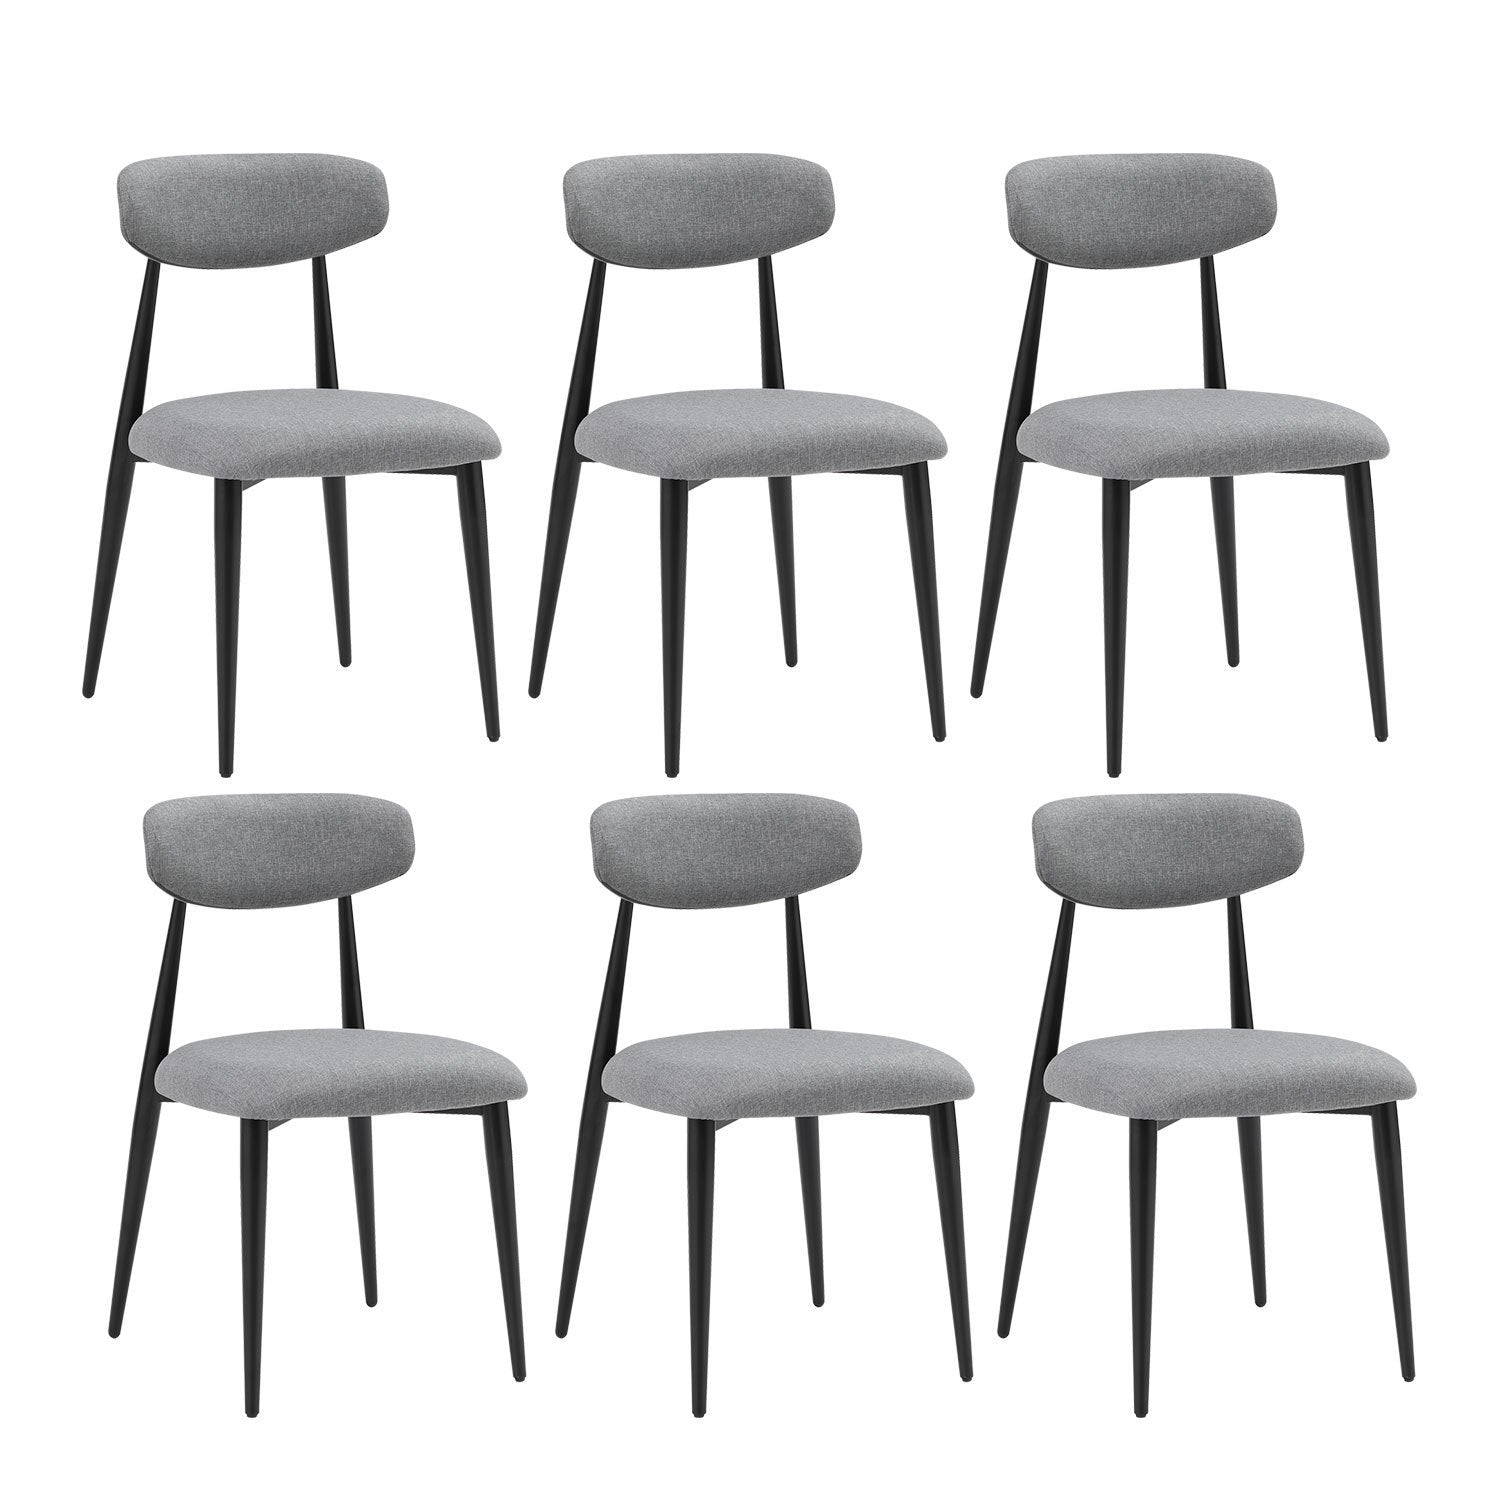 Dining Chairs Upholstered Chairs with Metal Legs (Set of 6) - Grey